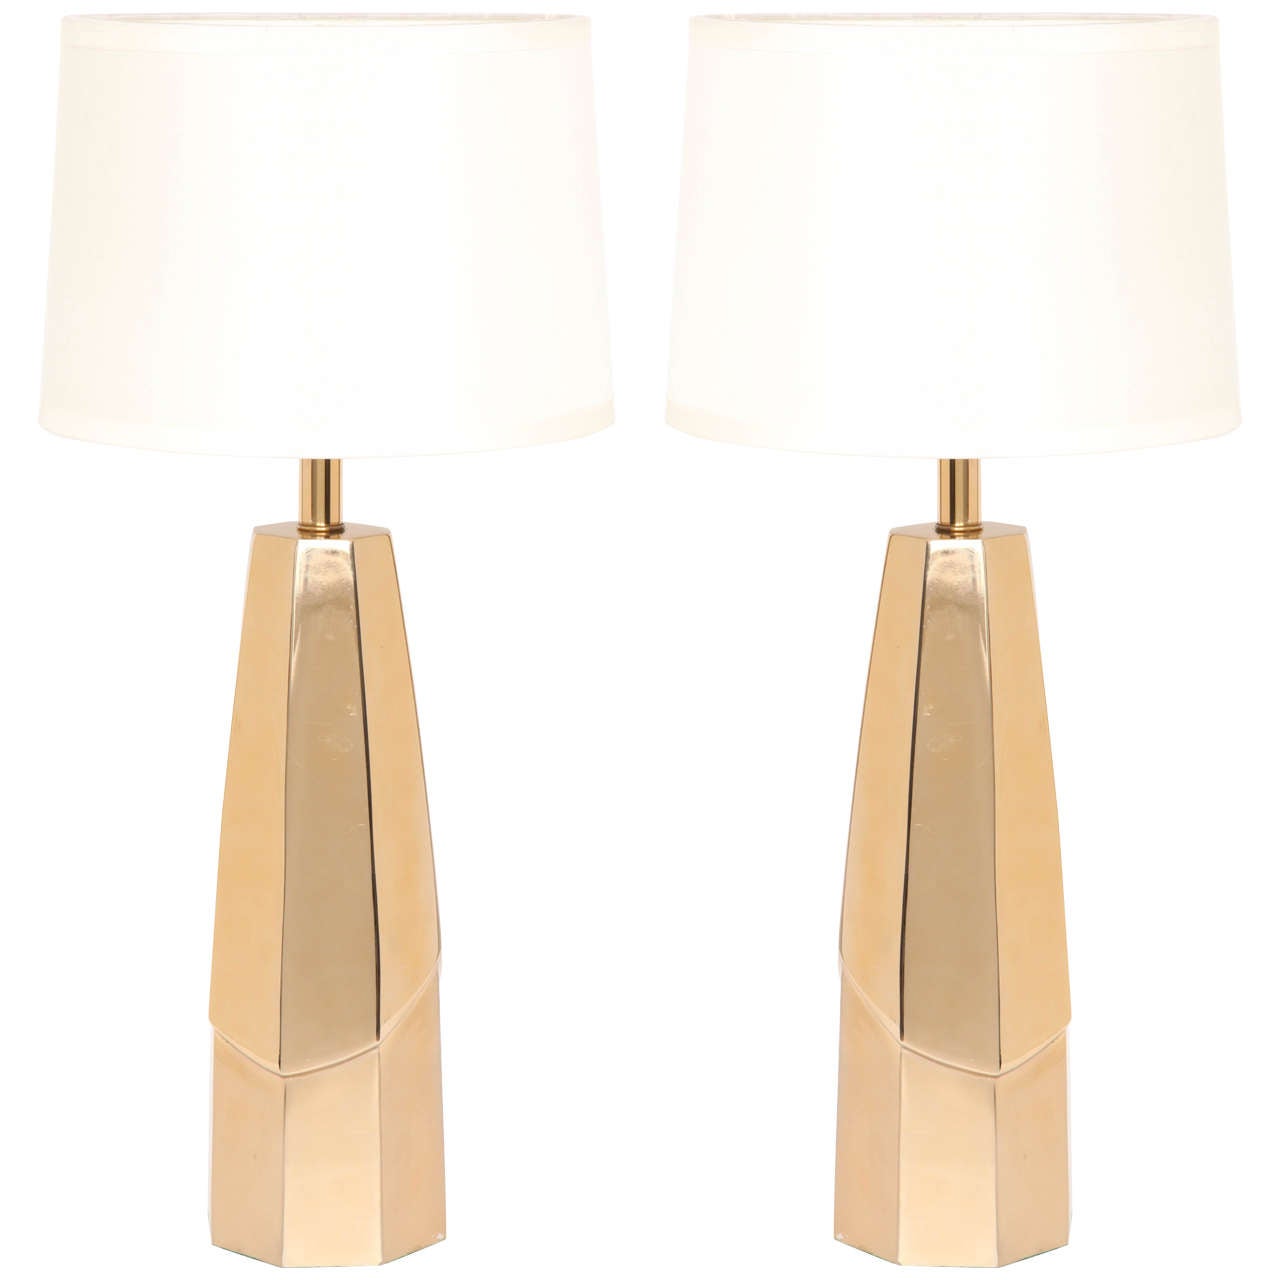 Polished Brass Lamps by Laurel